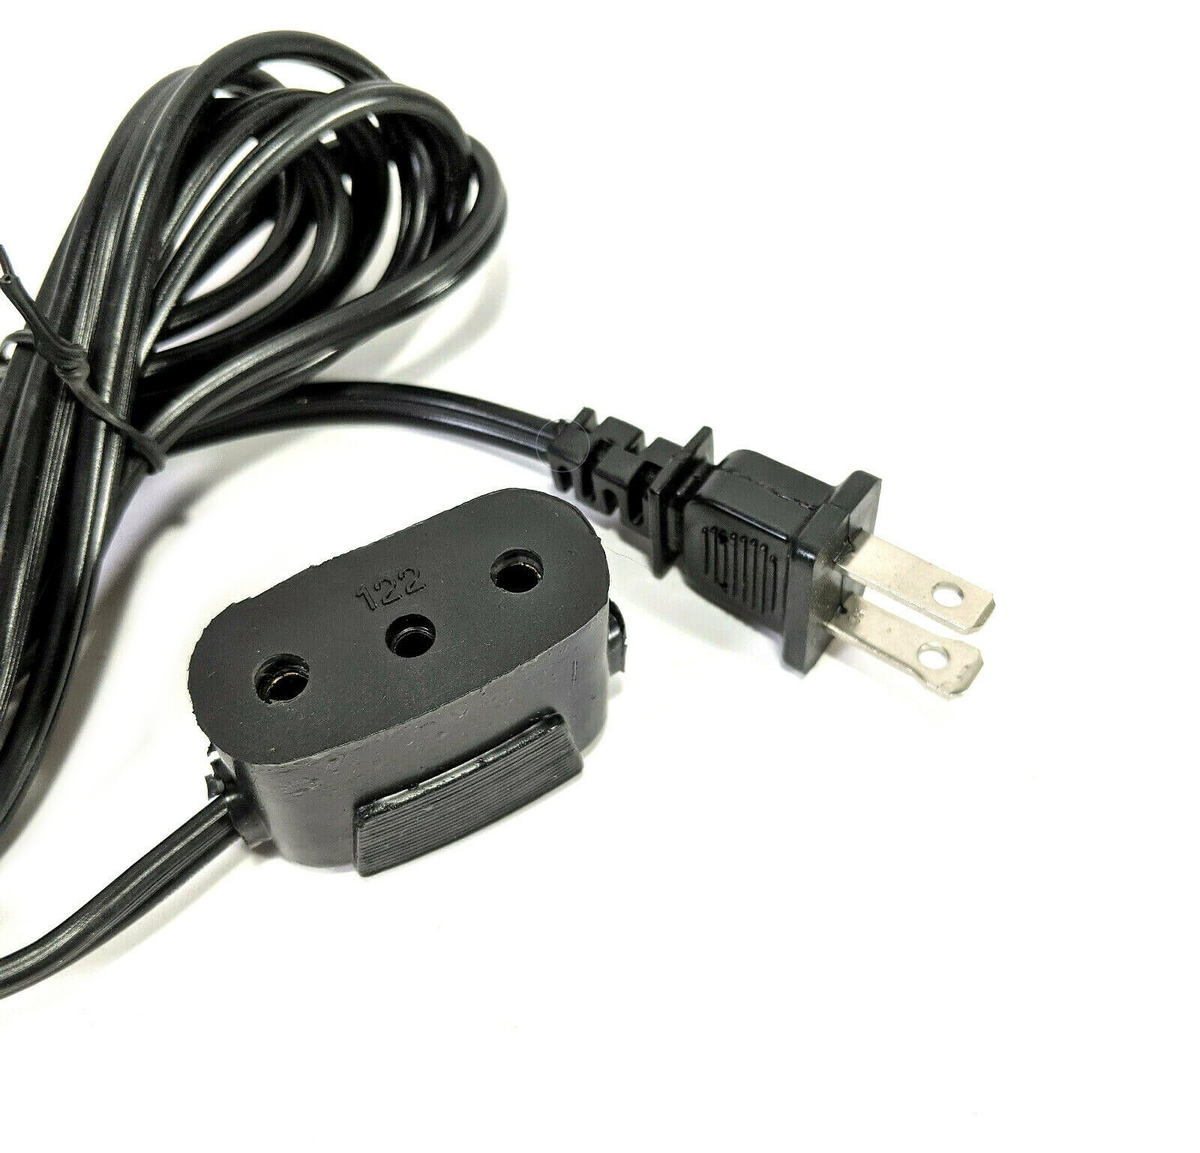 Power Cord #122 for Singer Sewing Machine 503,15-30,15-88,15-90,15